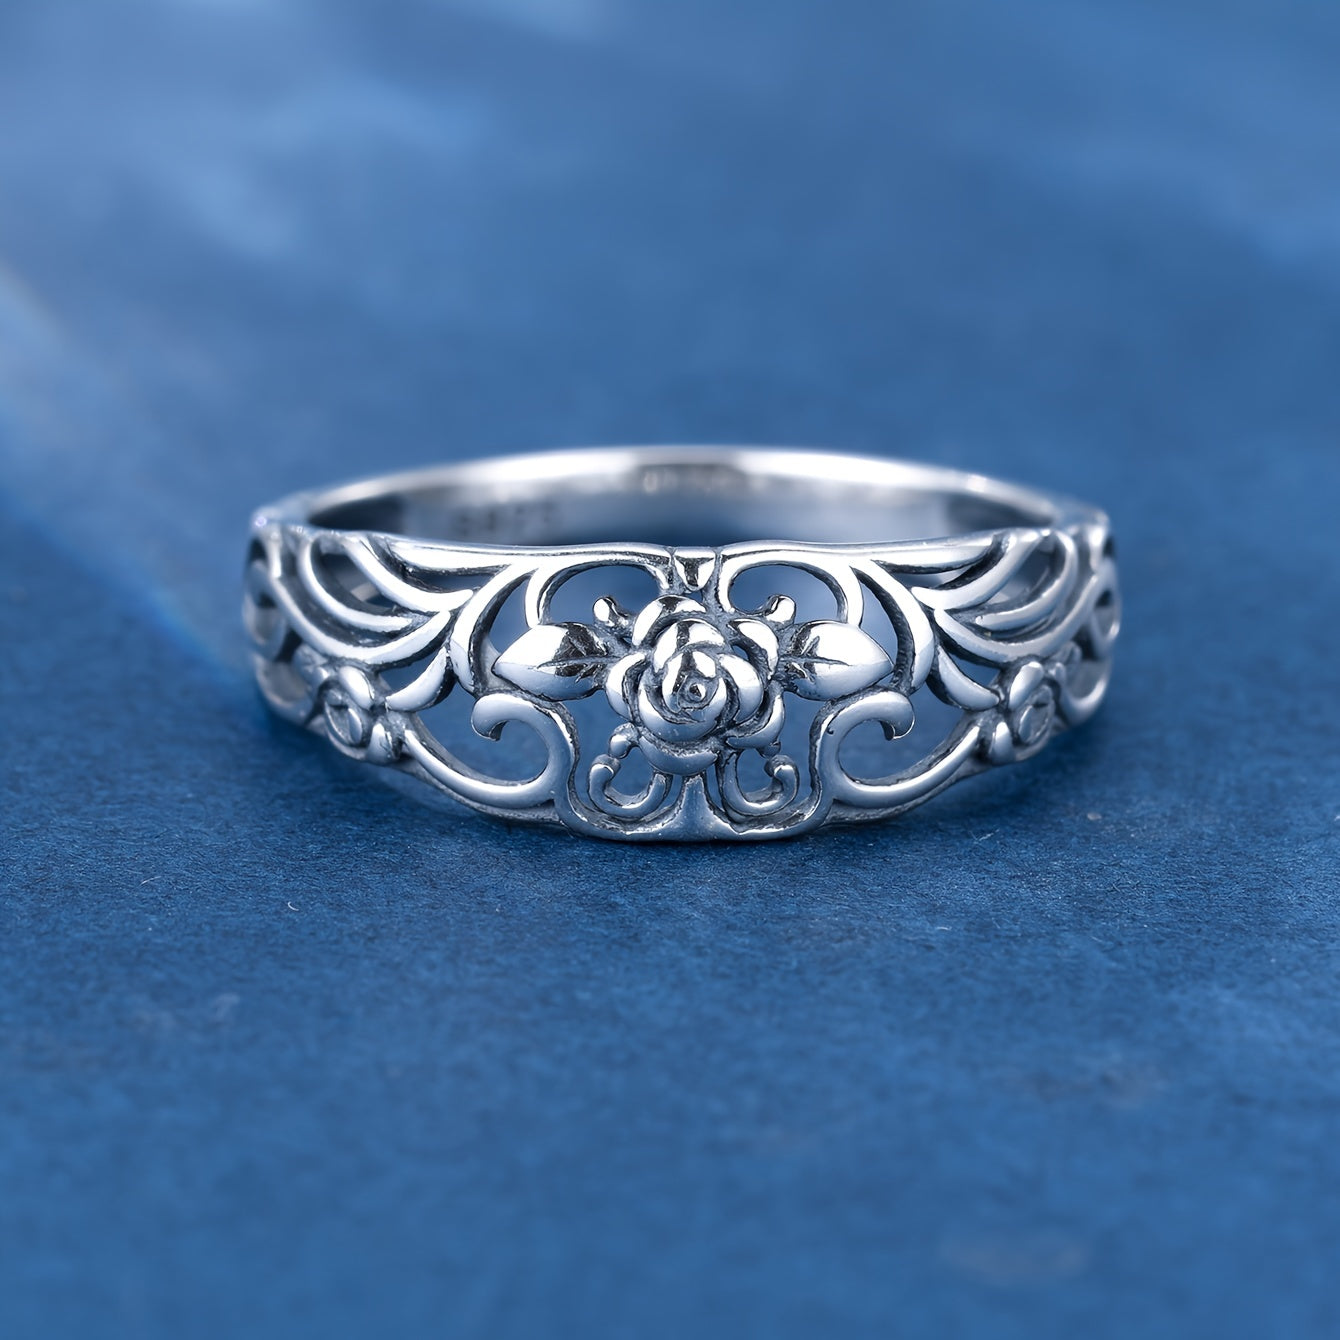 925 Sterling Silver Ring Delicate Rose Design Symbol Of Beauty And Romance High Quality Engagement \u002F Wedding Ring With Gift Box